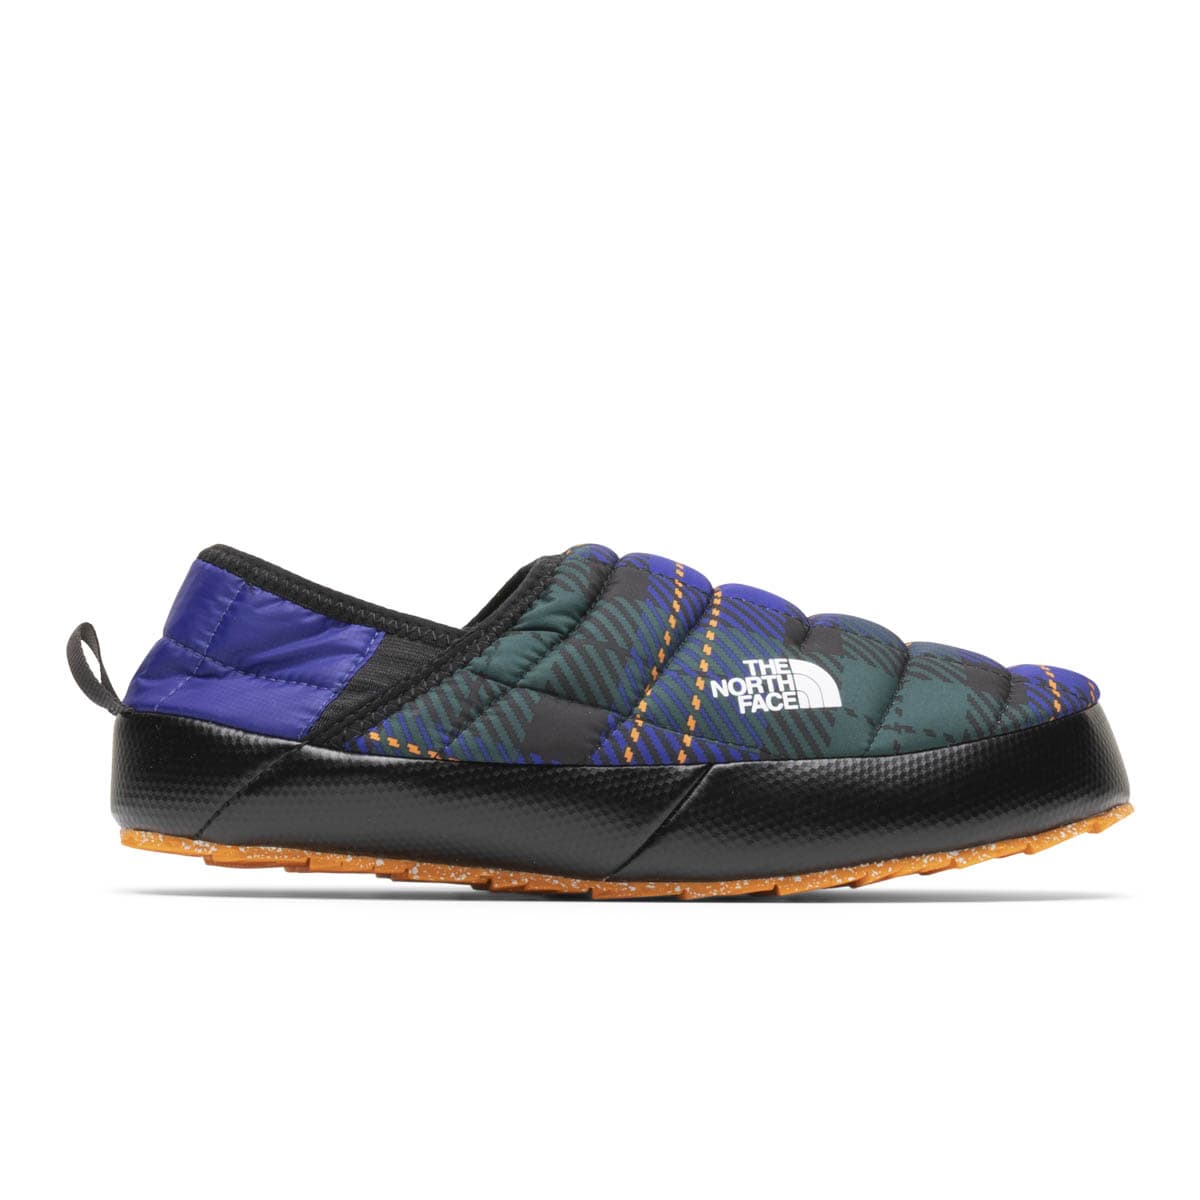 The North Face Womens WOMEN'S THERMOBALL TRACTION MULE V